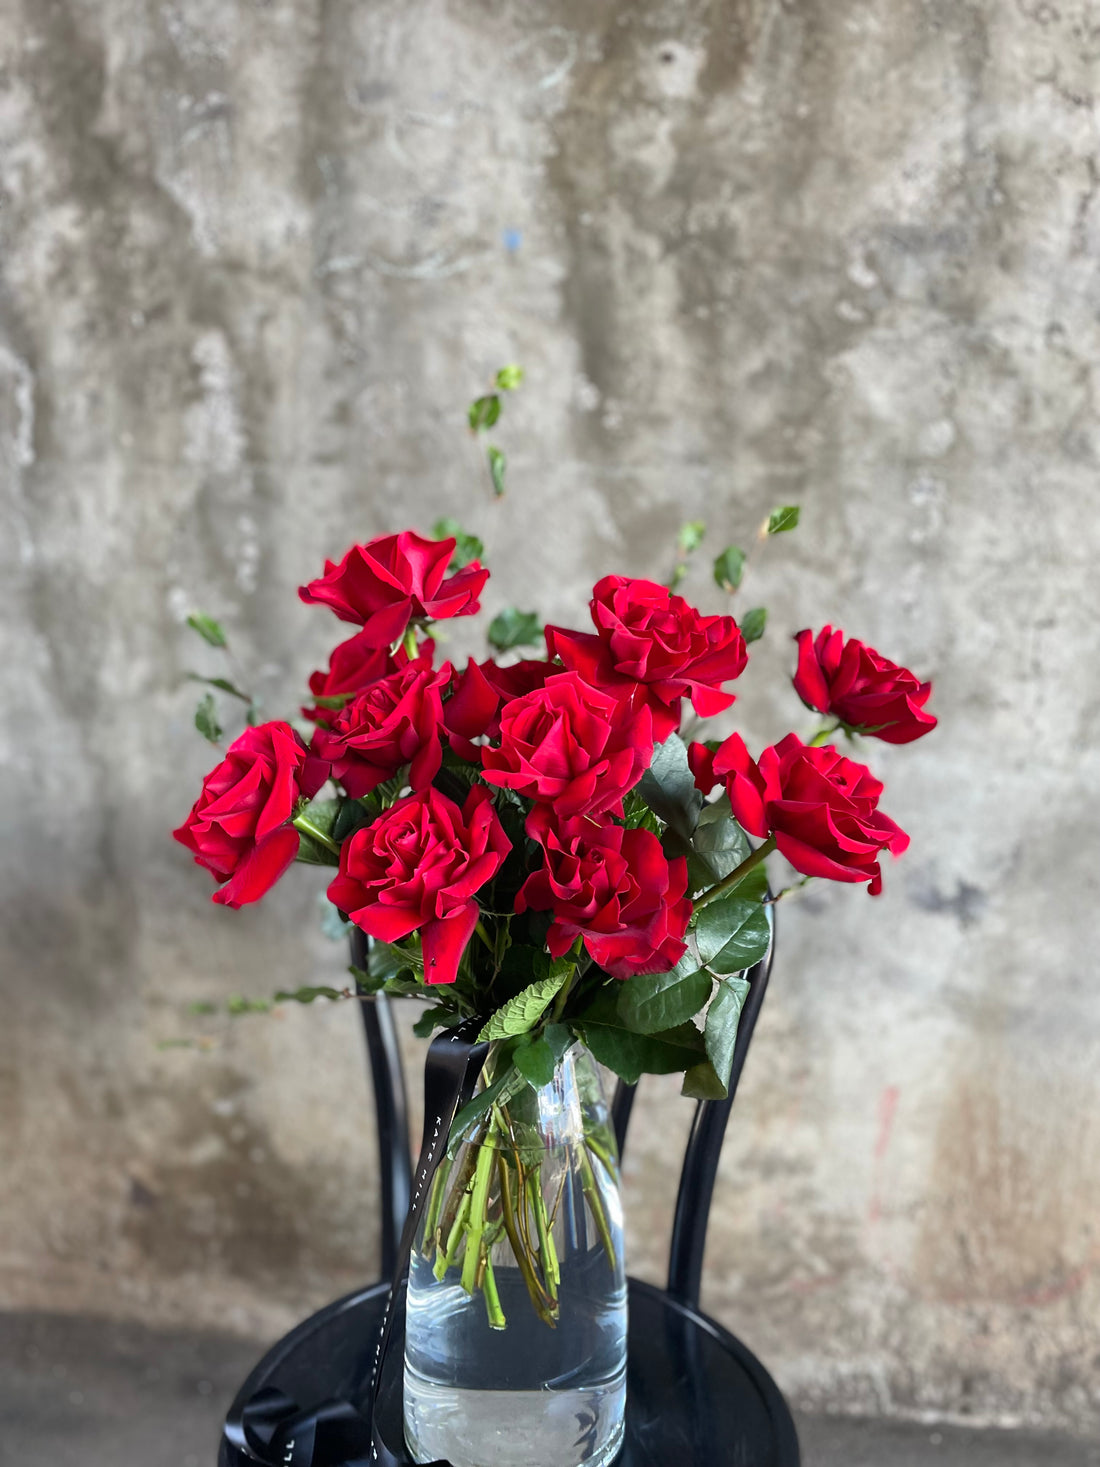 Close up image of red roses in clear glass vase. Clear glass vase featuring 10 stems of red roses, sitting on a black bentwood chair in front of a concrete wall.